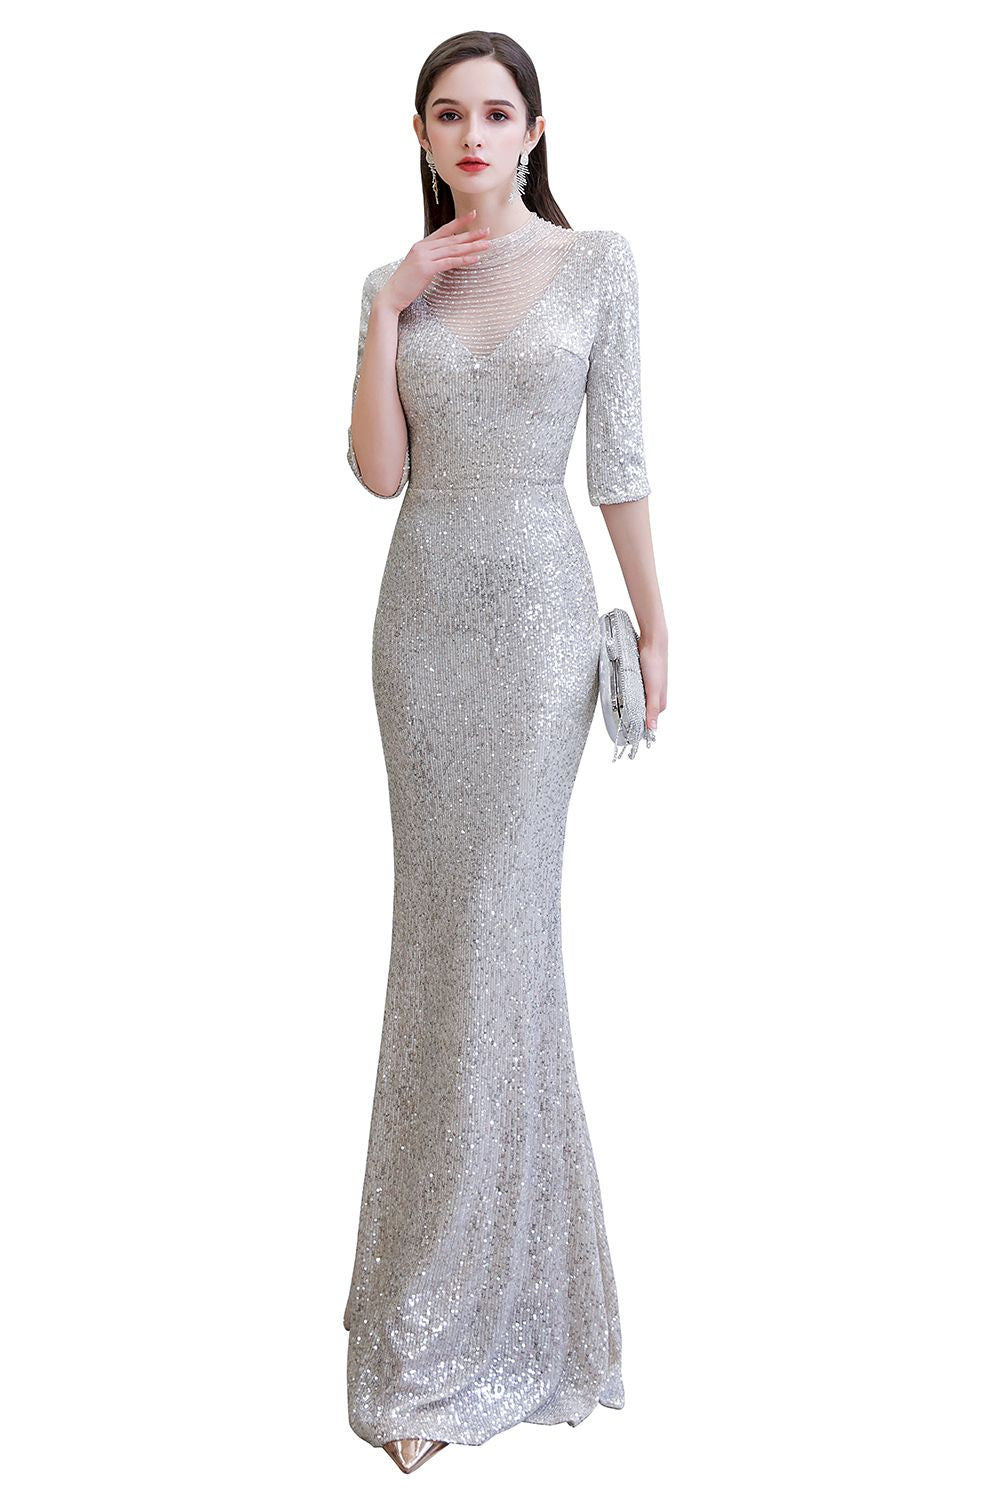 Silver Half Sleeve Sequins Prom Dress | Mermaid Long Evening Gowns